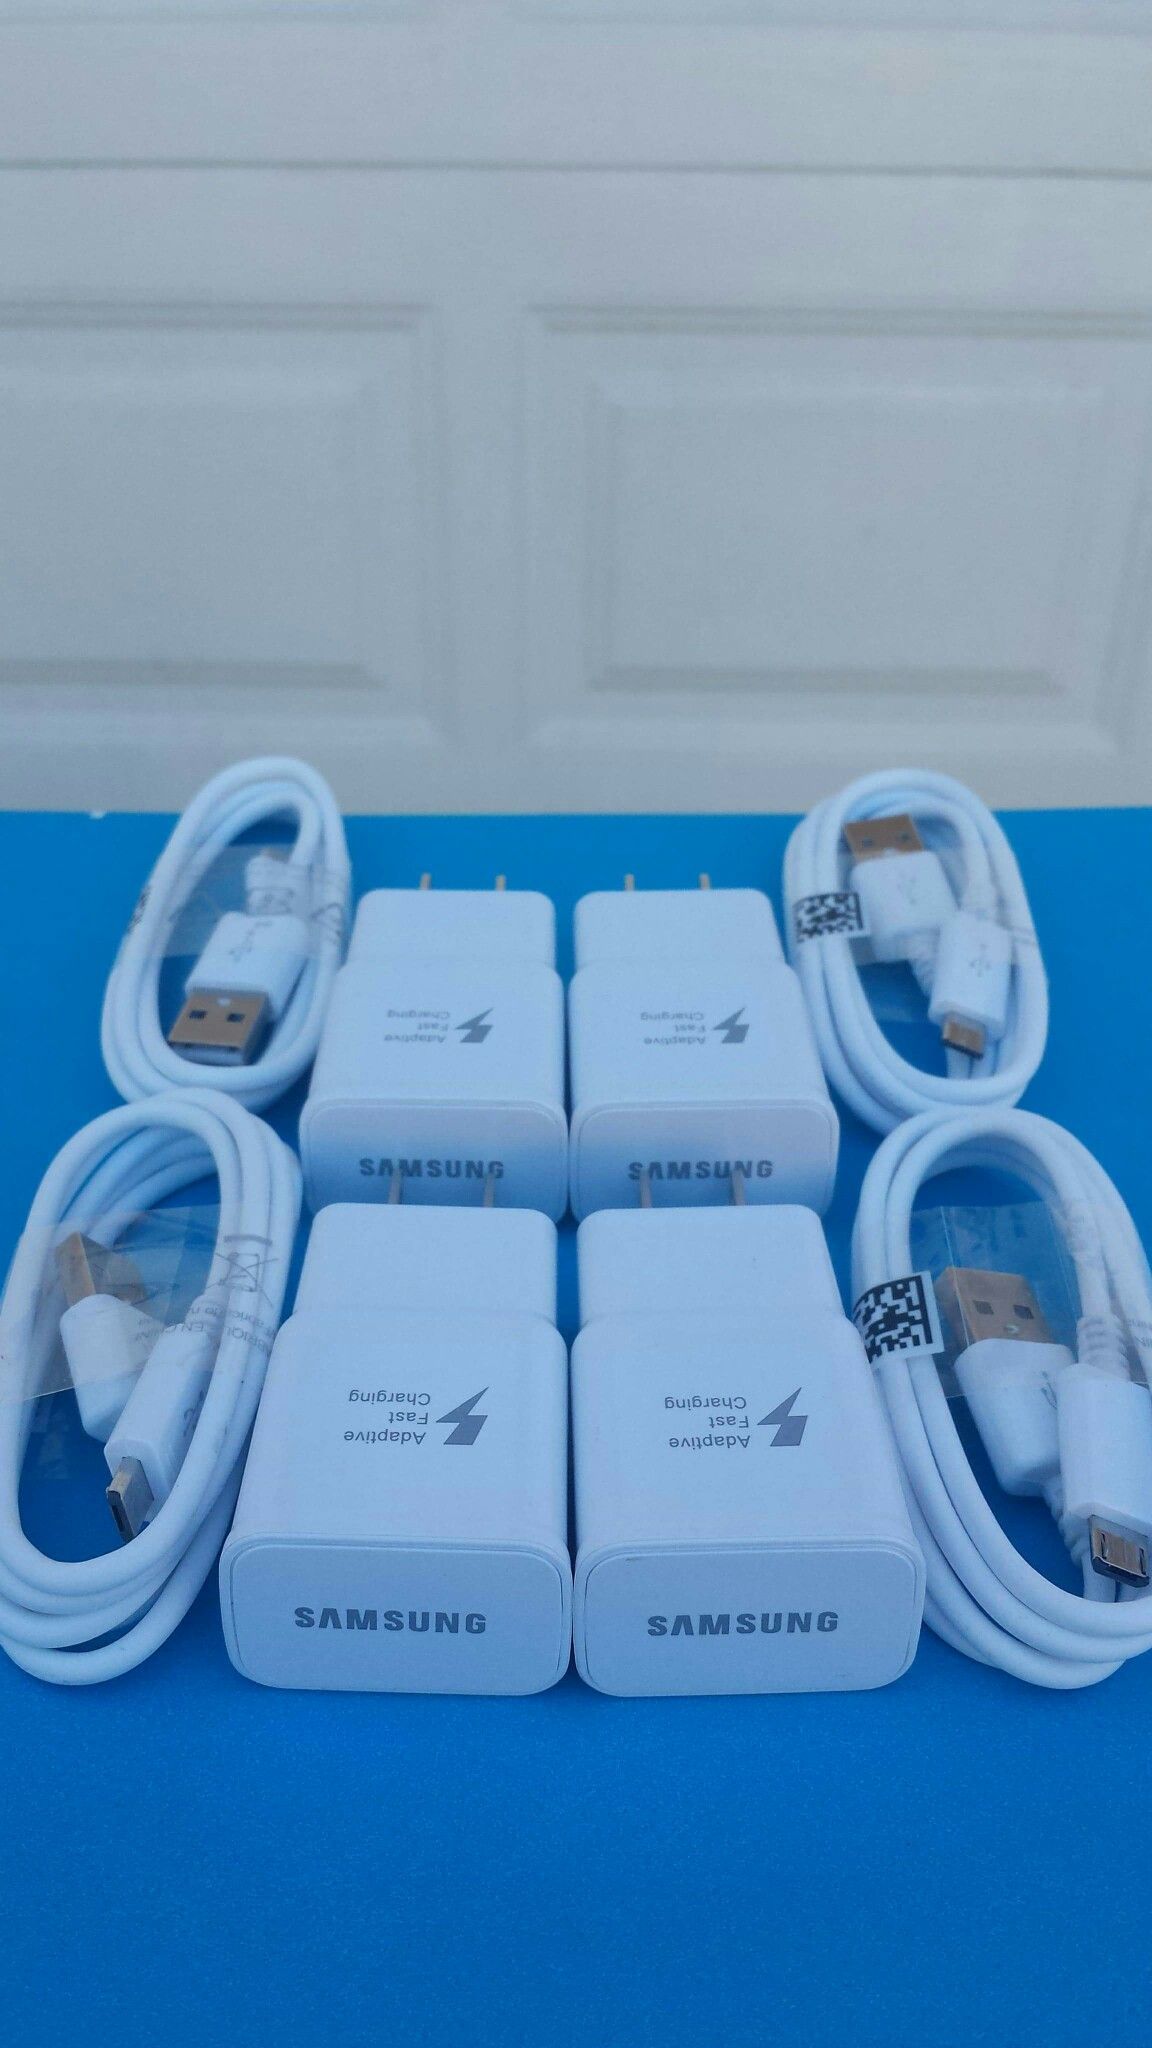 4 Original Samsung Fast Chargers Brand New